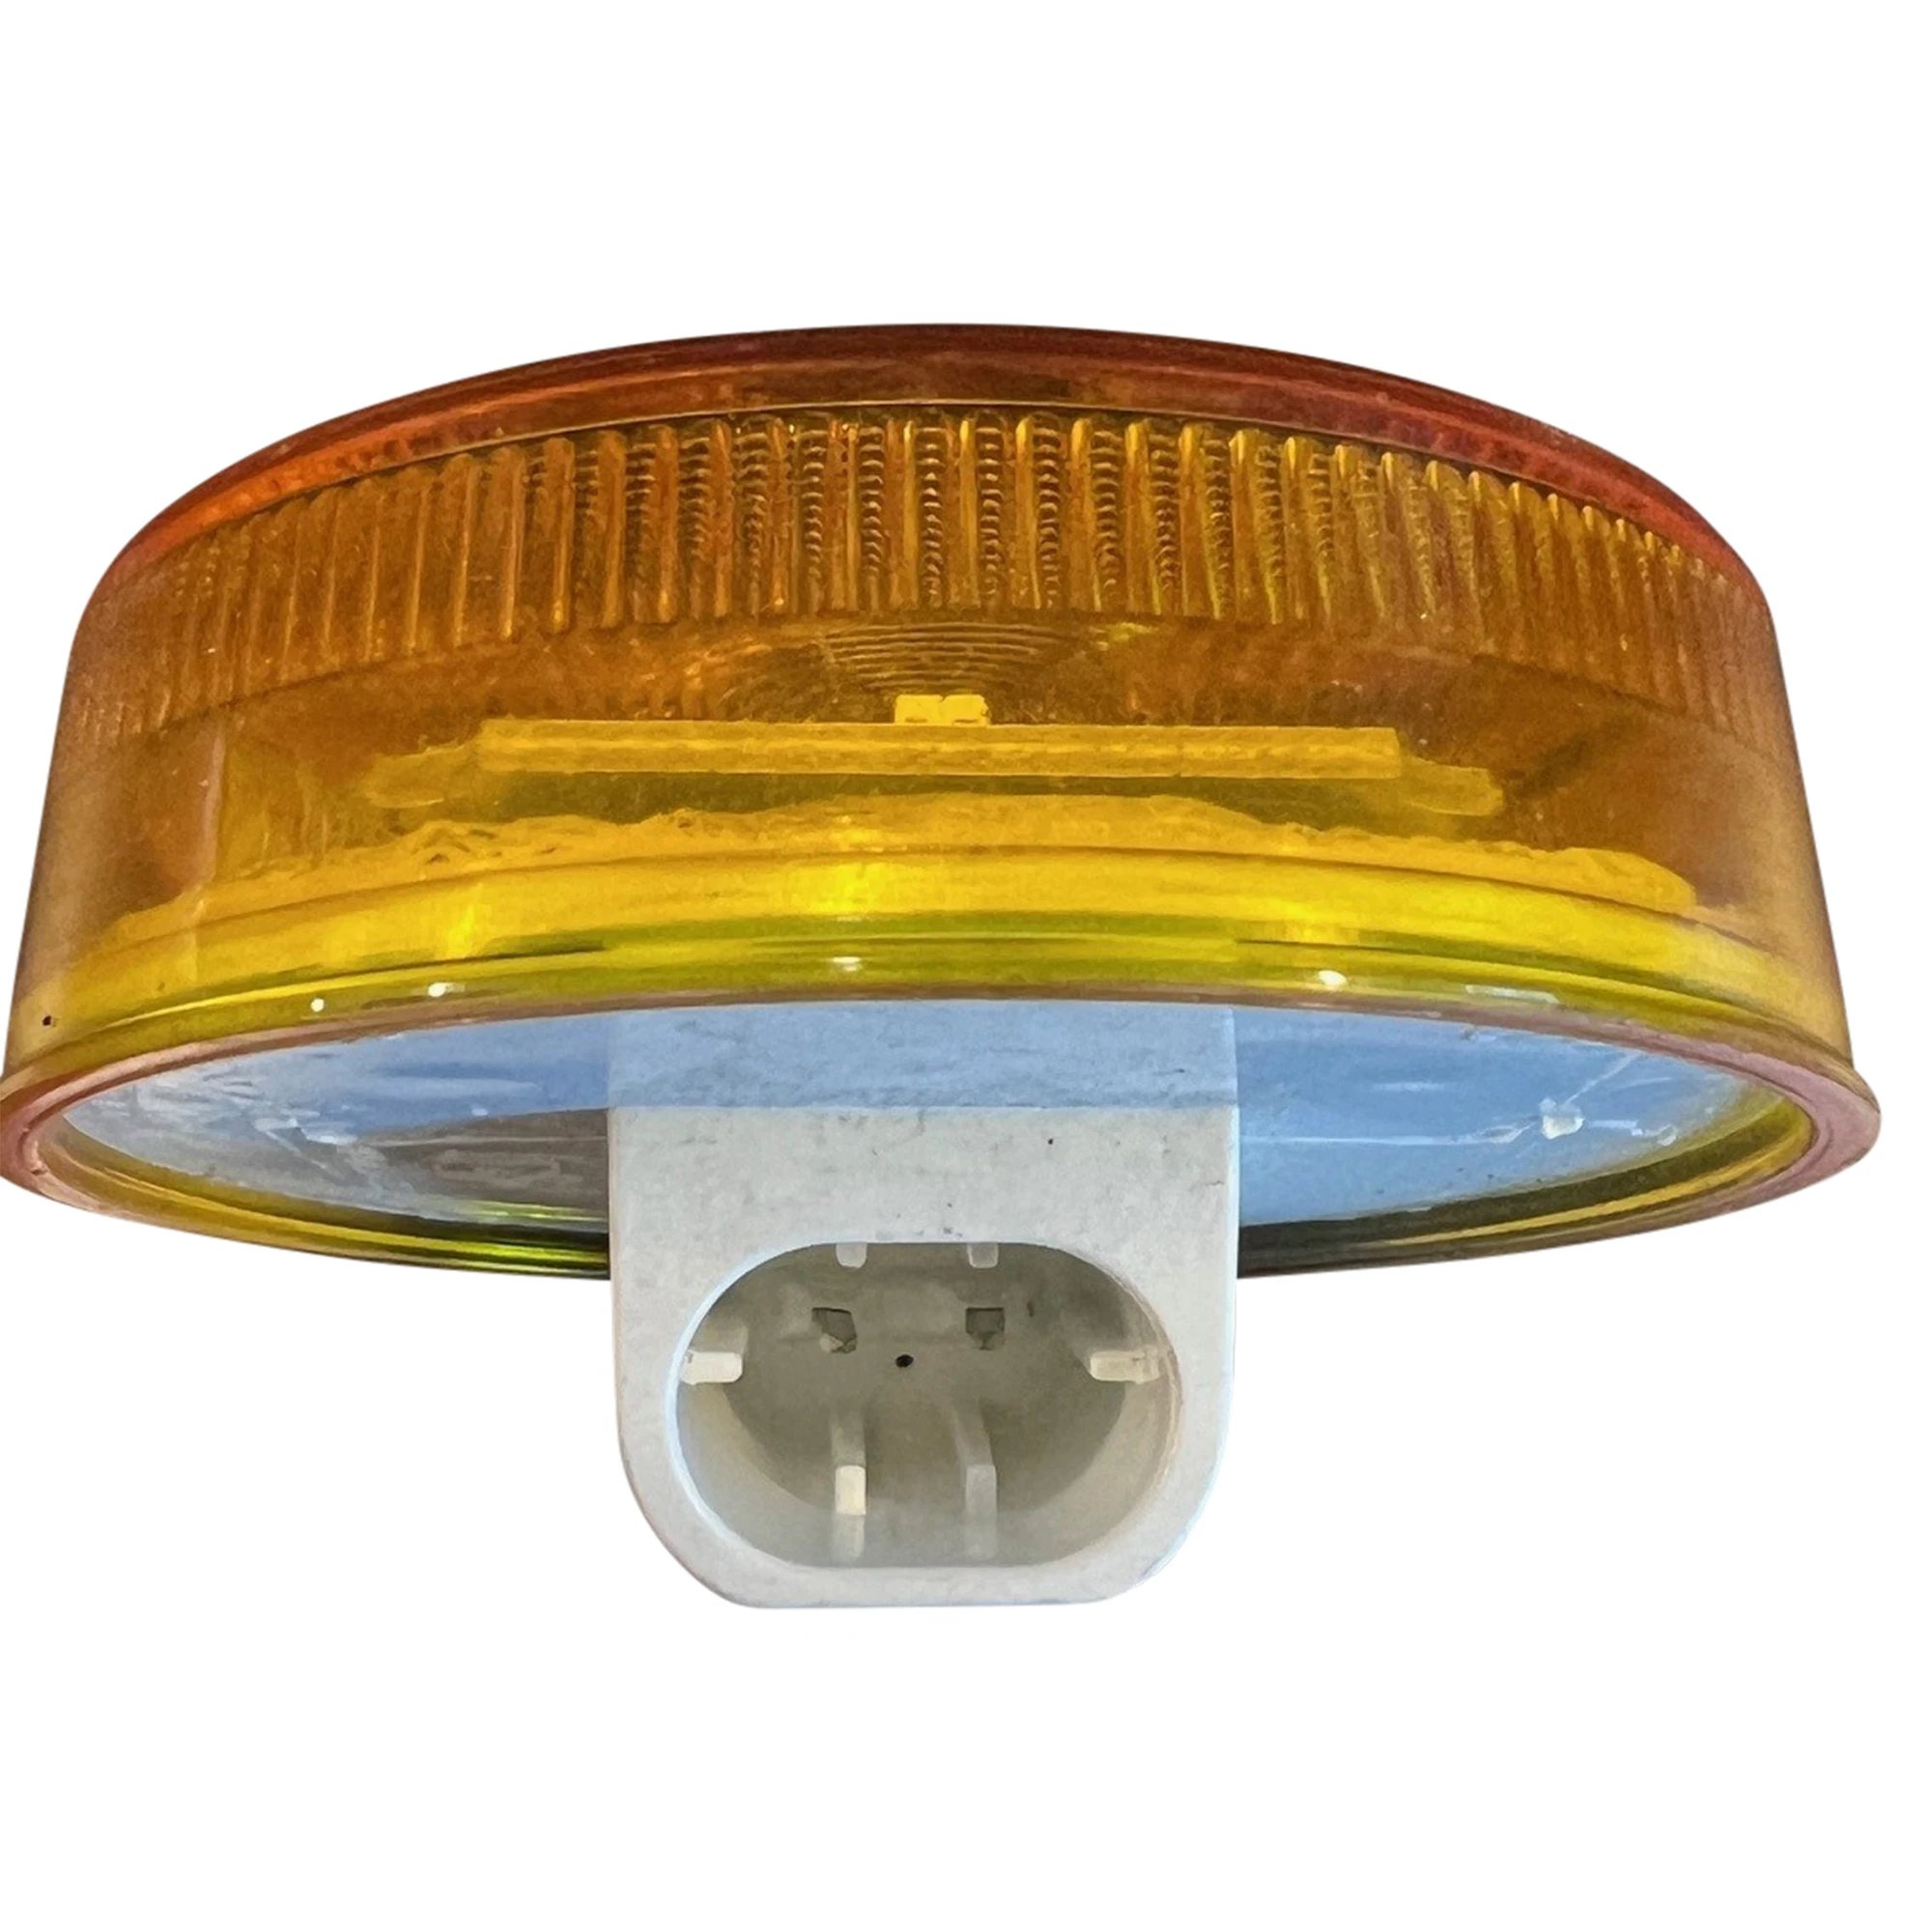 Wastebuilt® Replacement for Heil LED 2.5" Amber Clearance Marker - Light Only